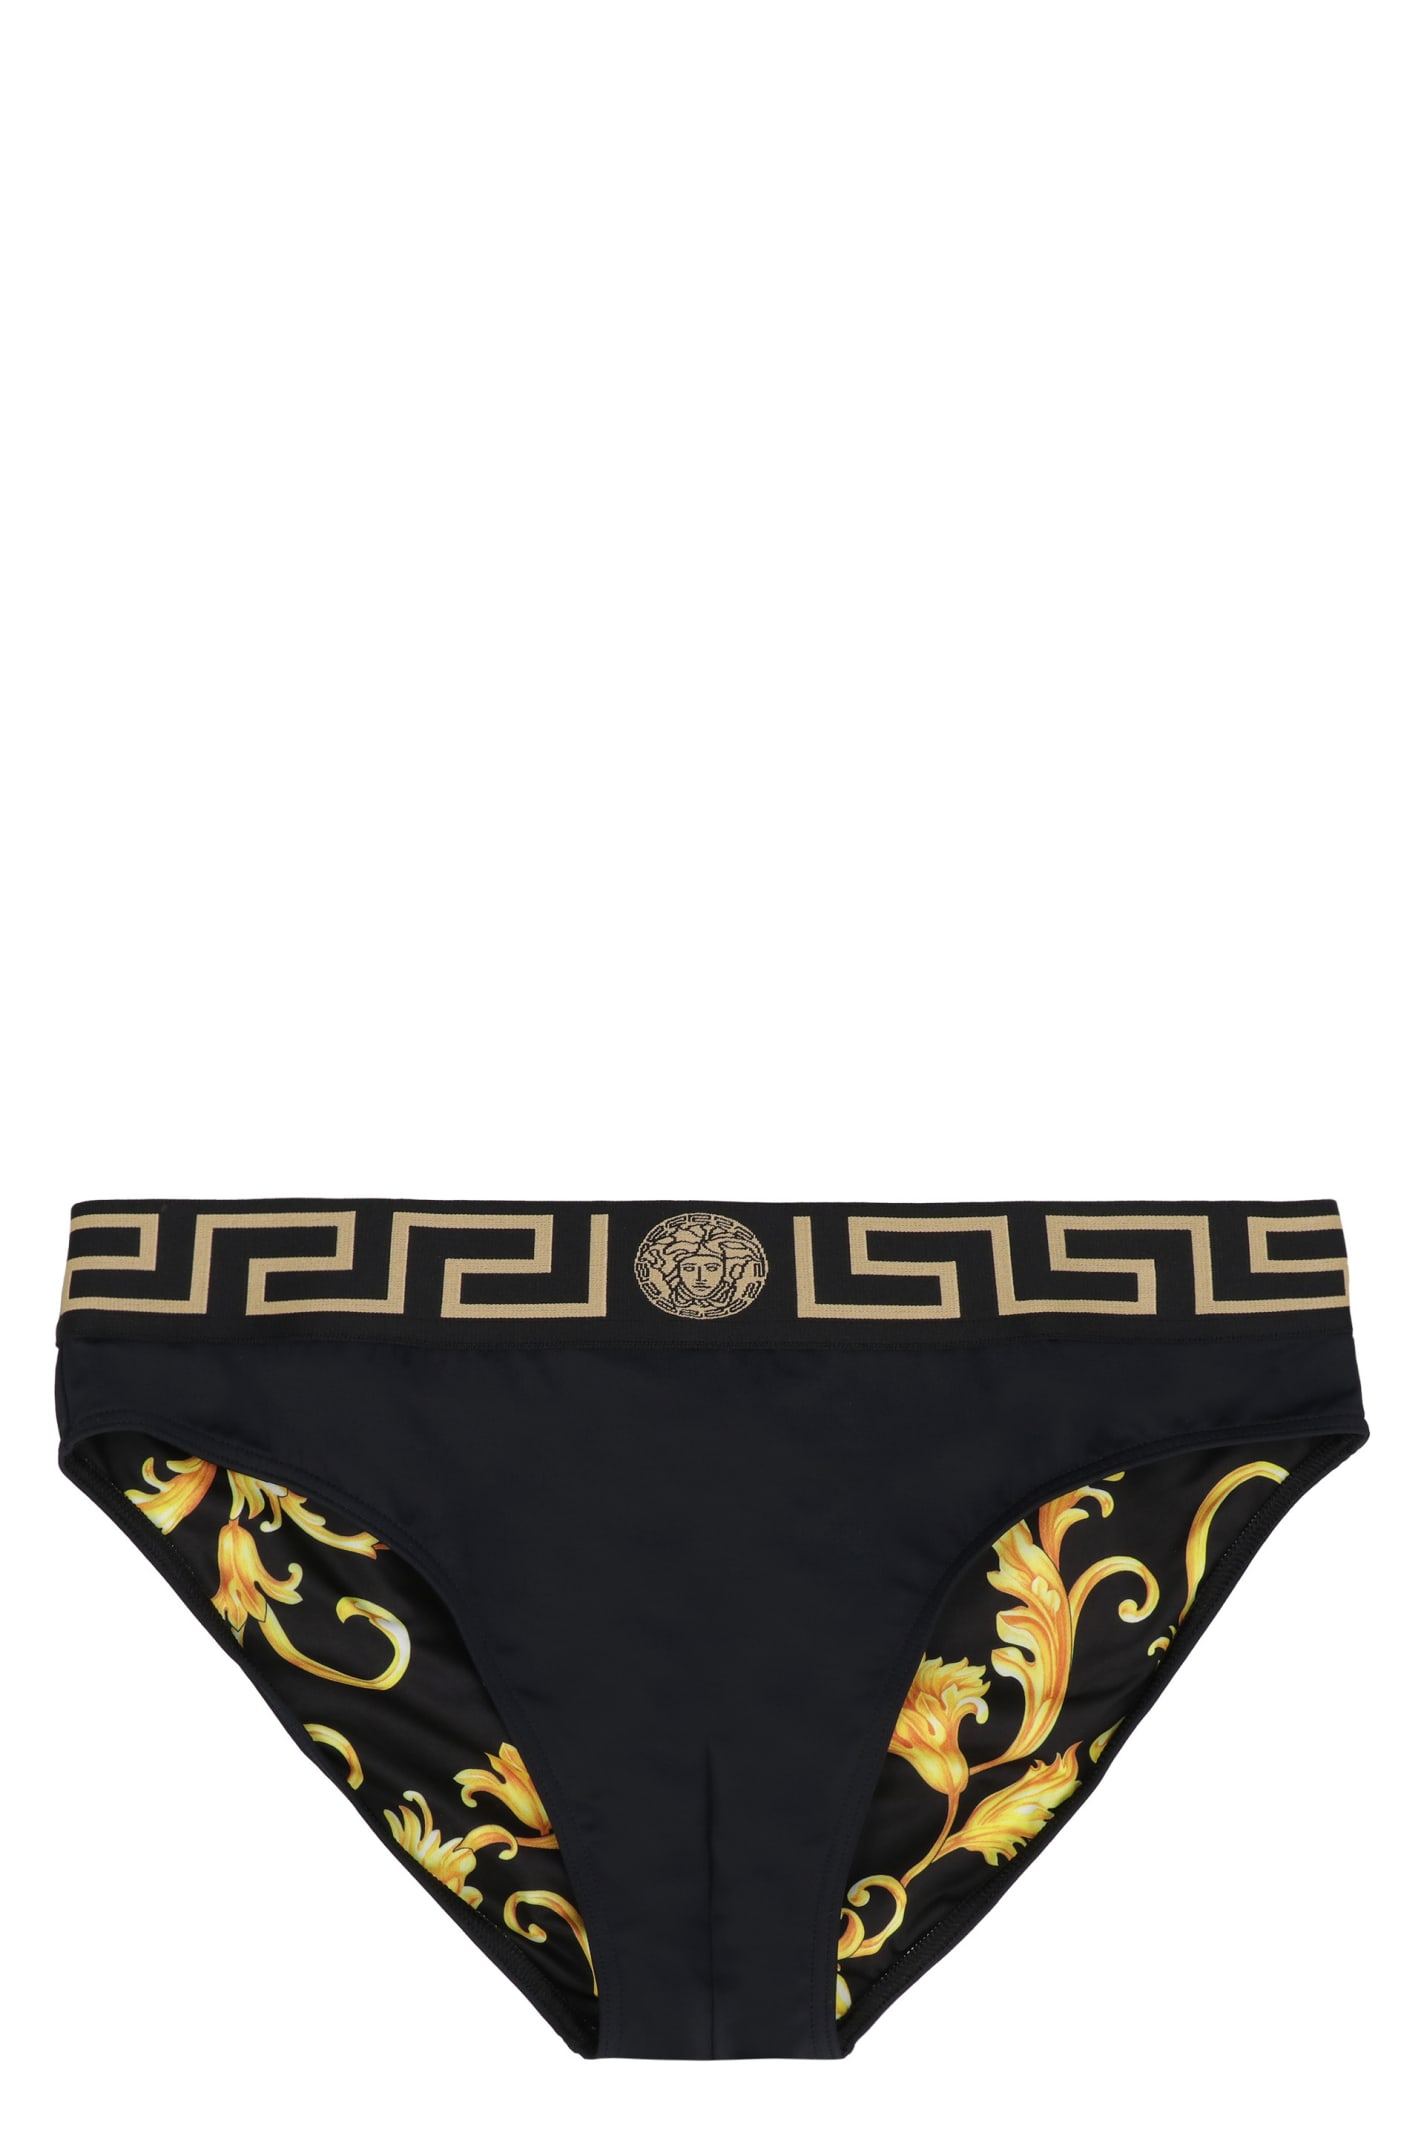 Versace Iconic Thong, Bluette/gold